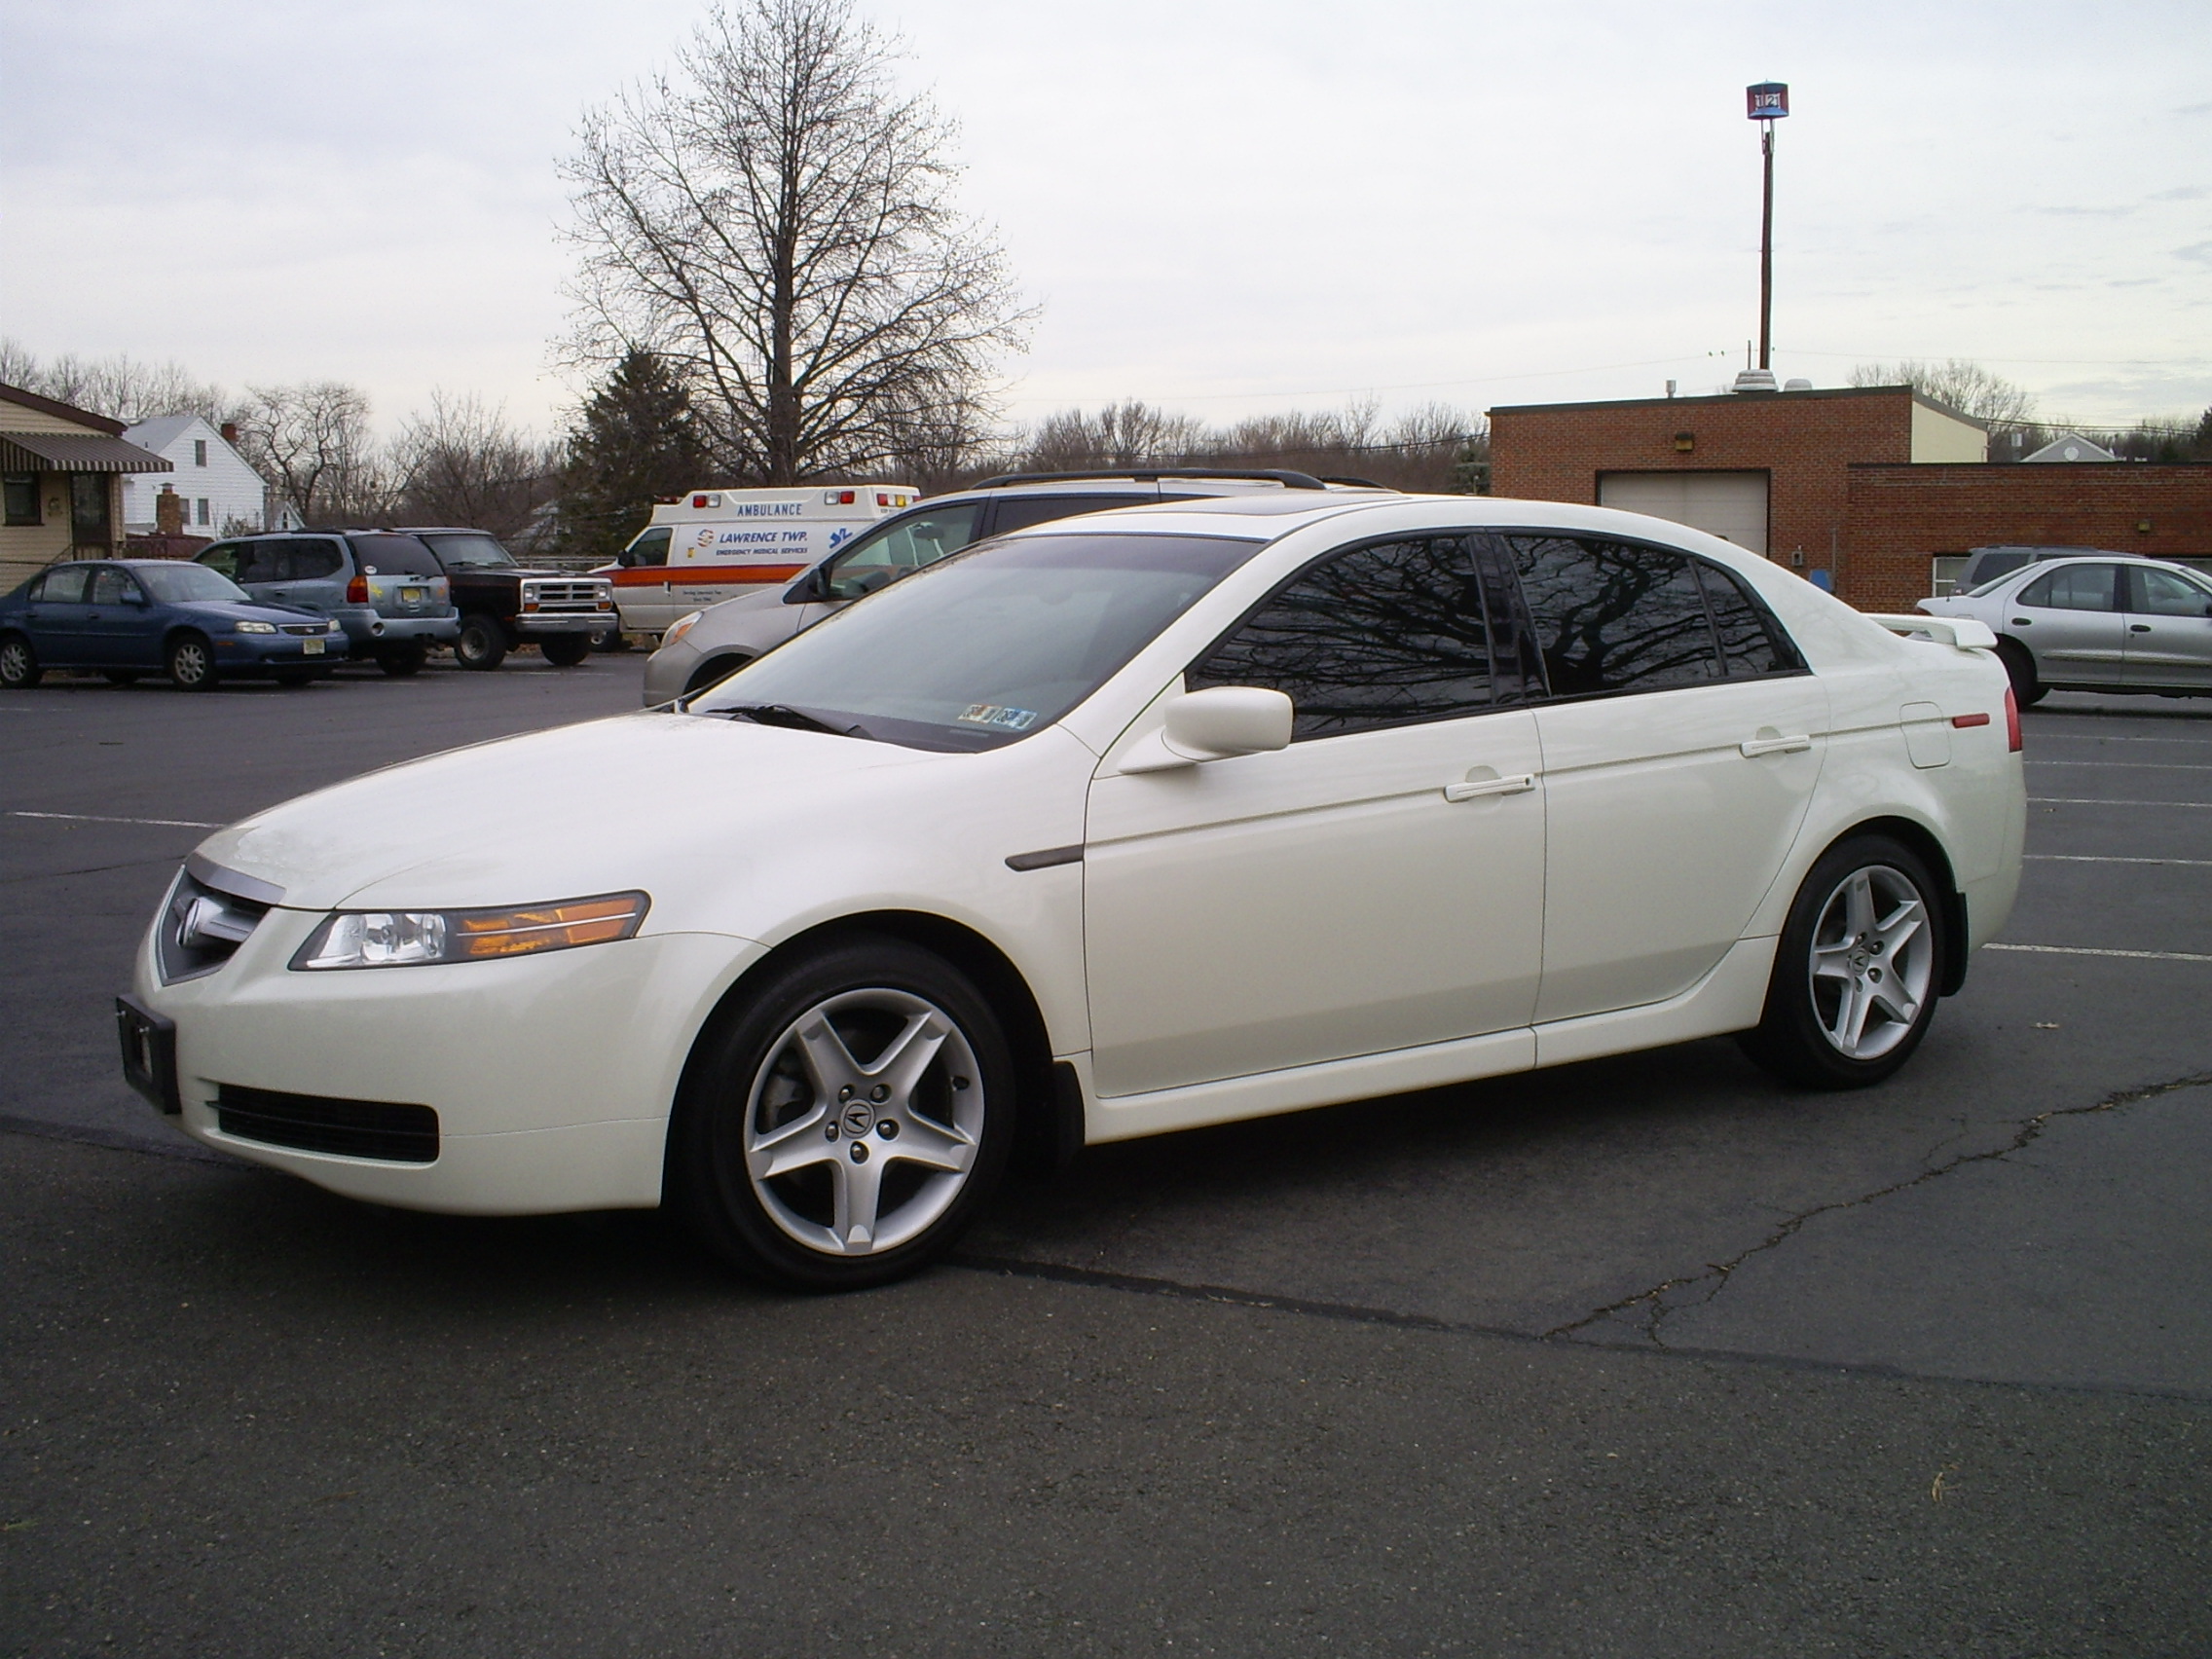 Acura TL Pics, Vehicles Collection